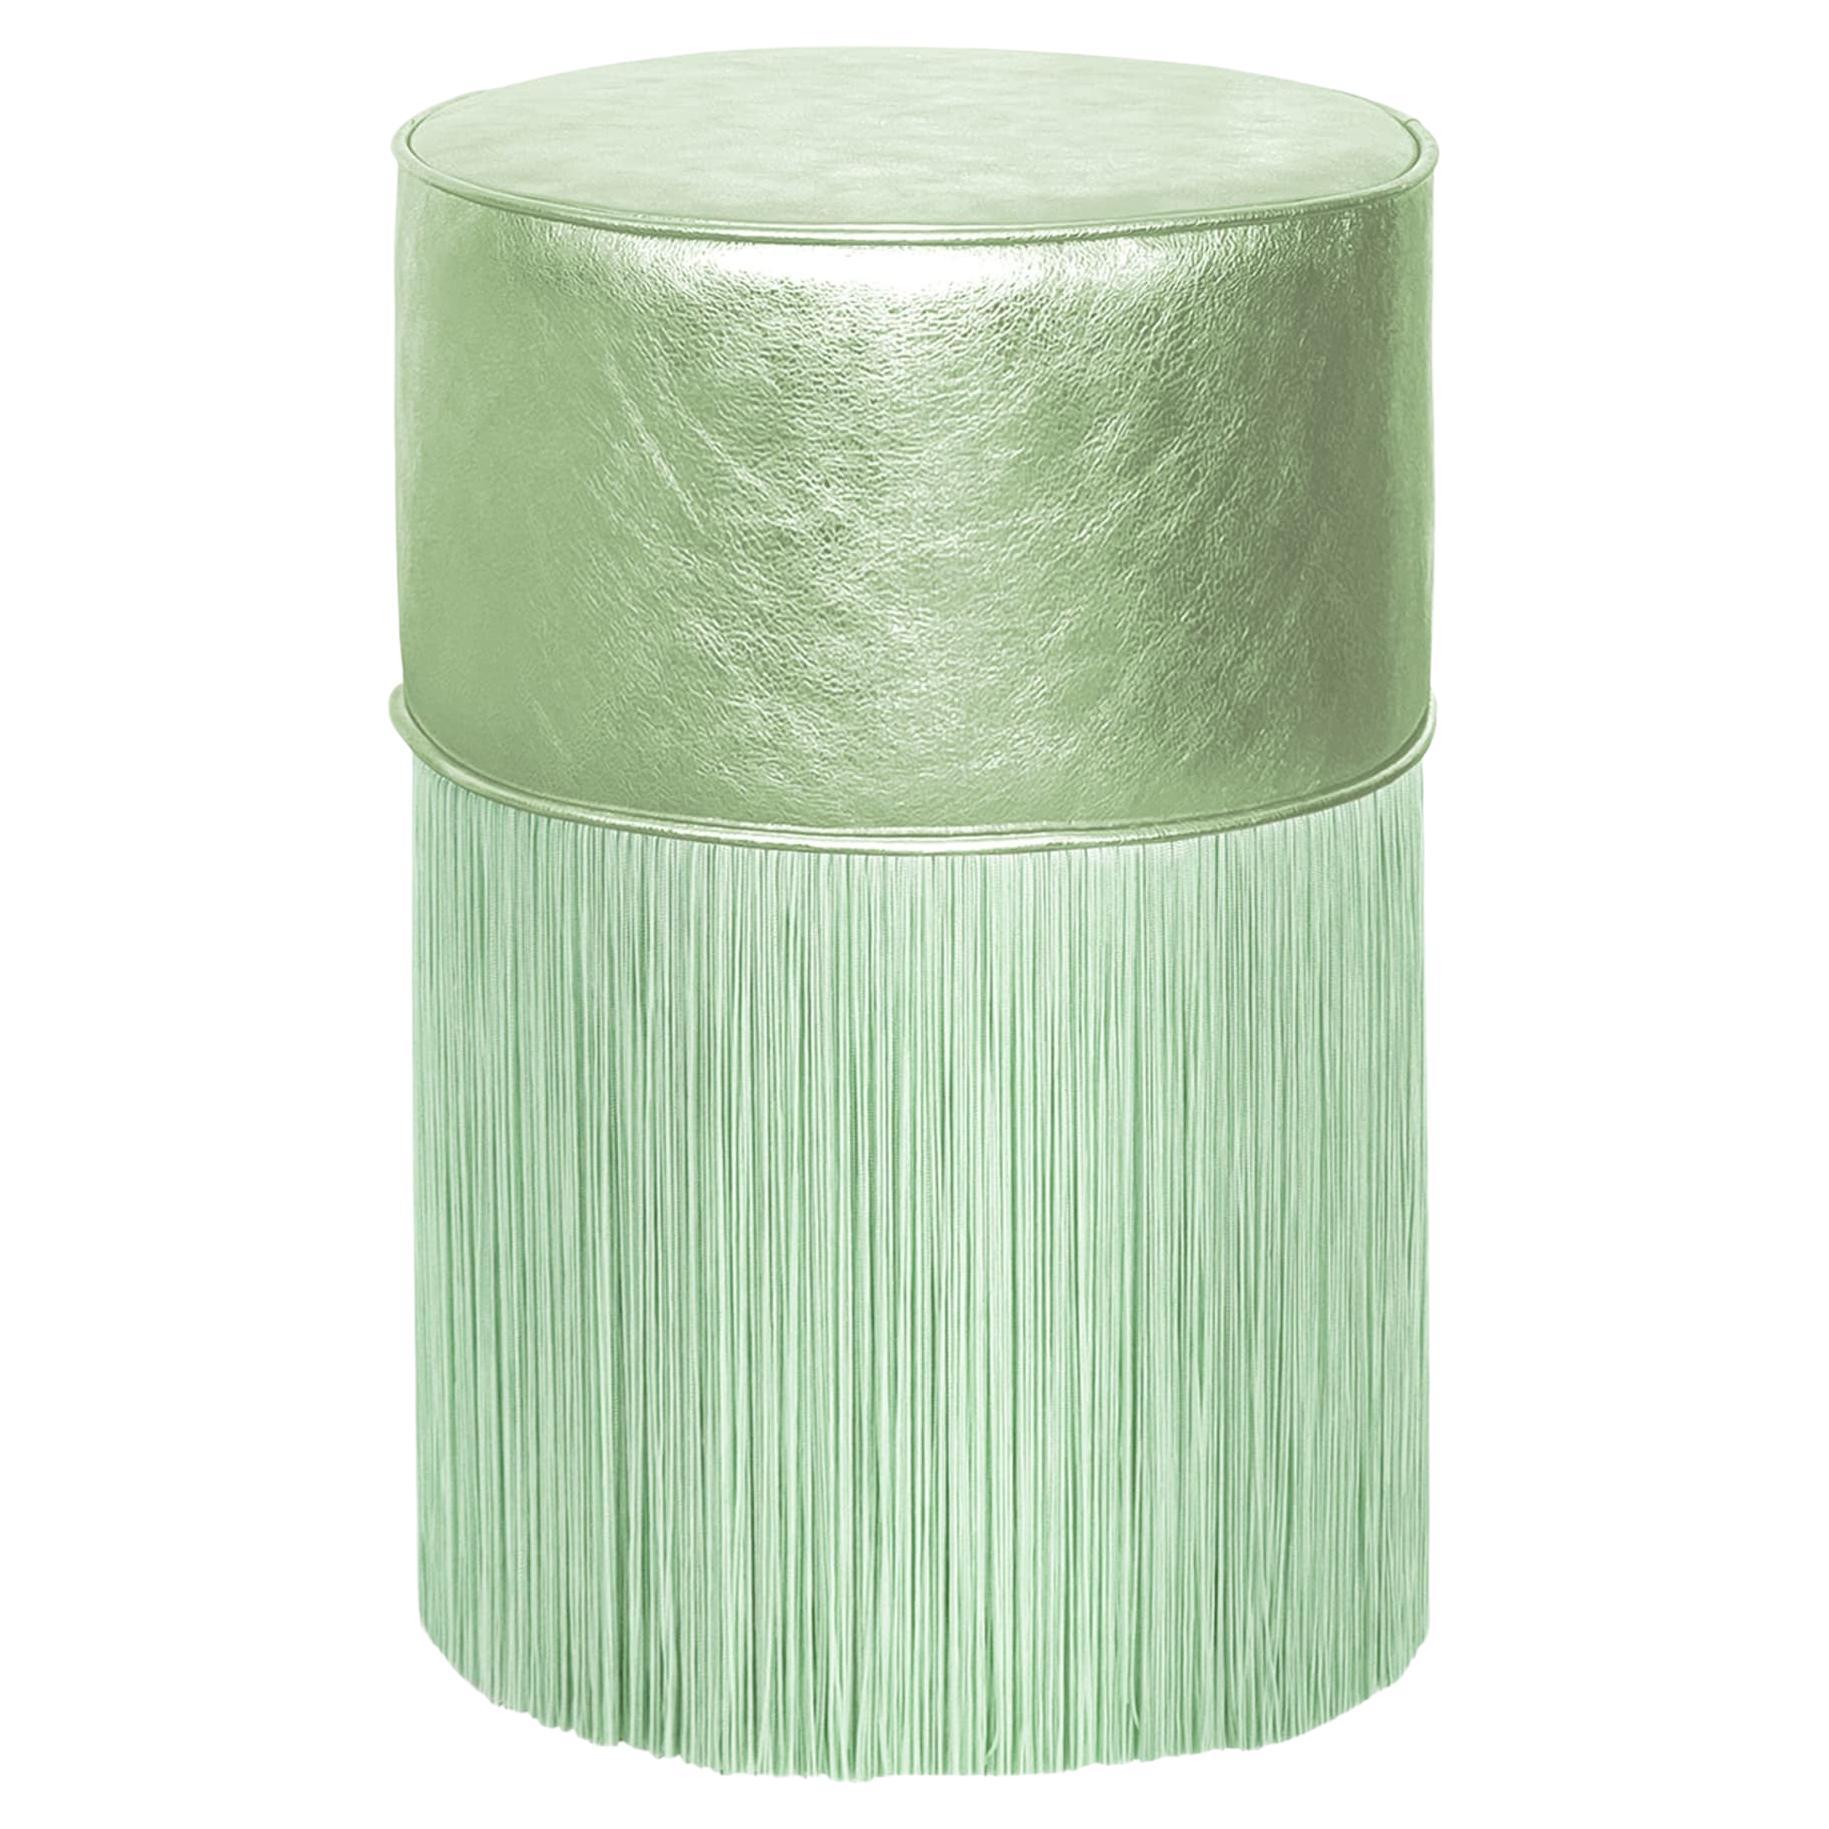 Gleaming Light Green Metallic Leather Pouf by Lorenza Bozzoli For Sale